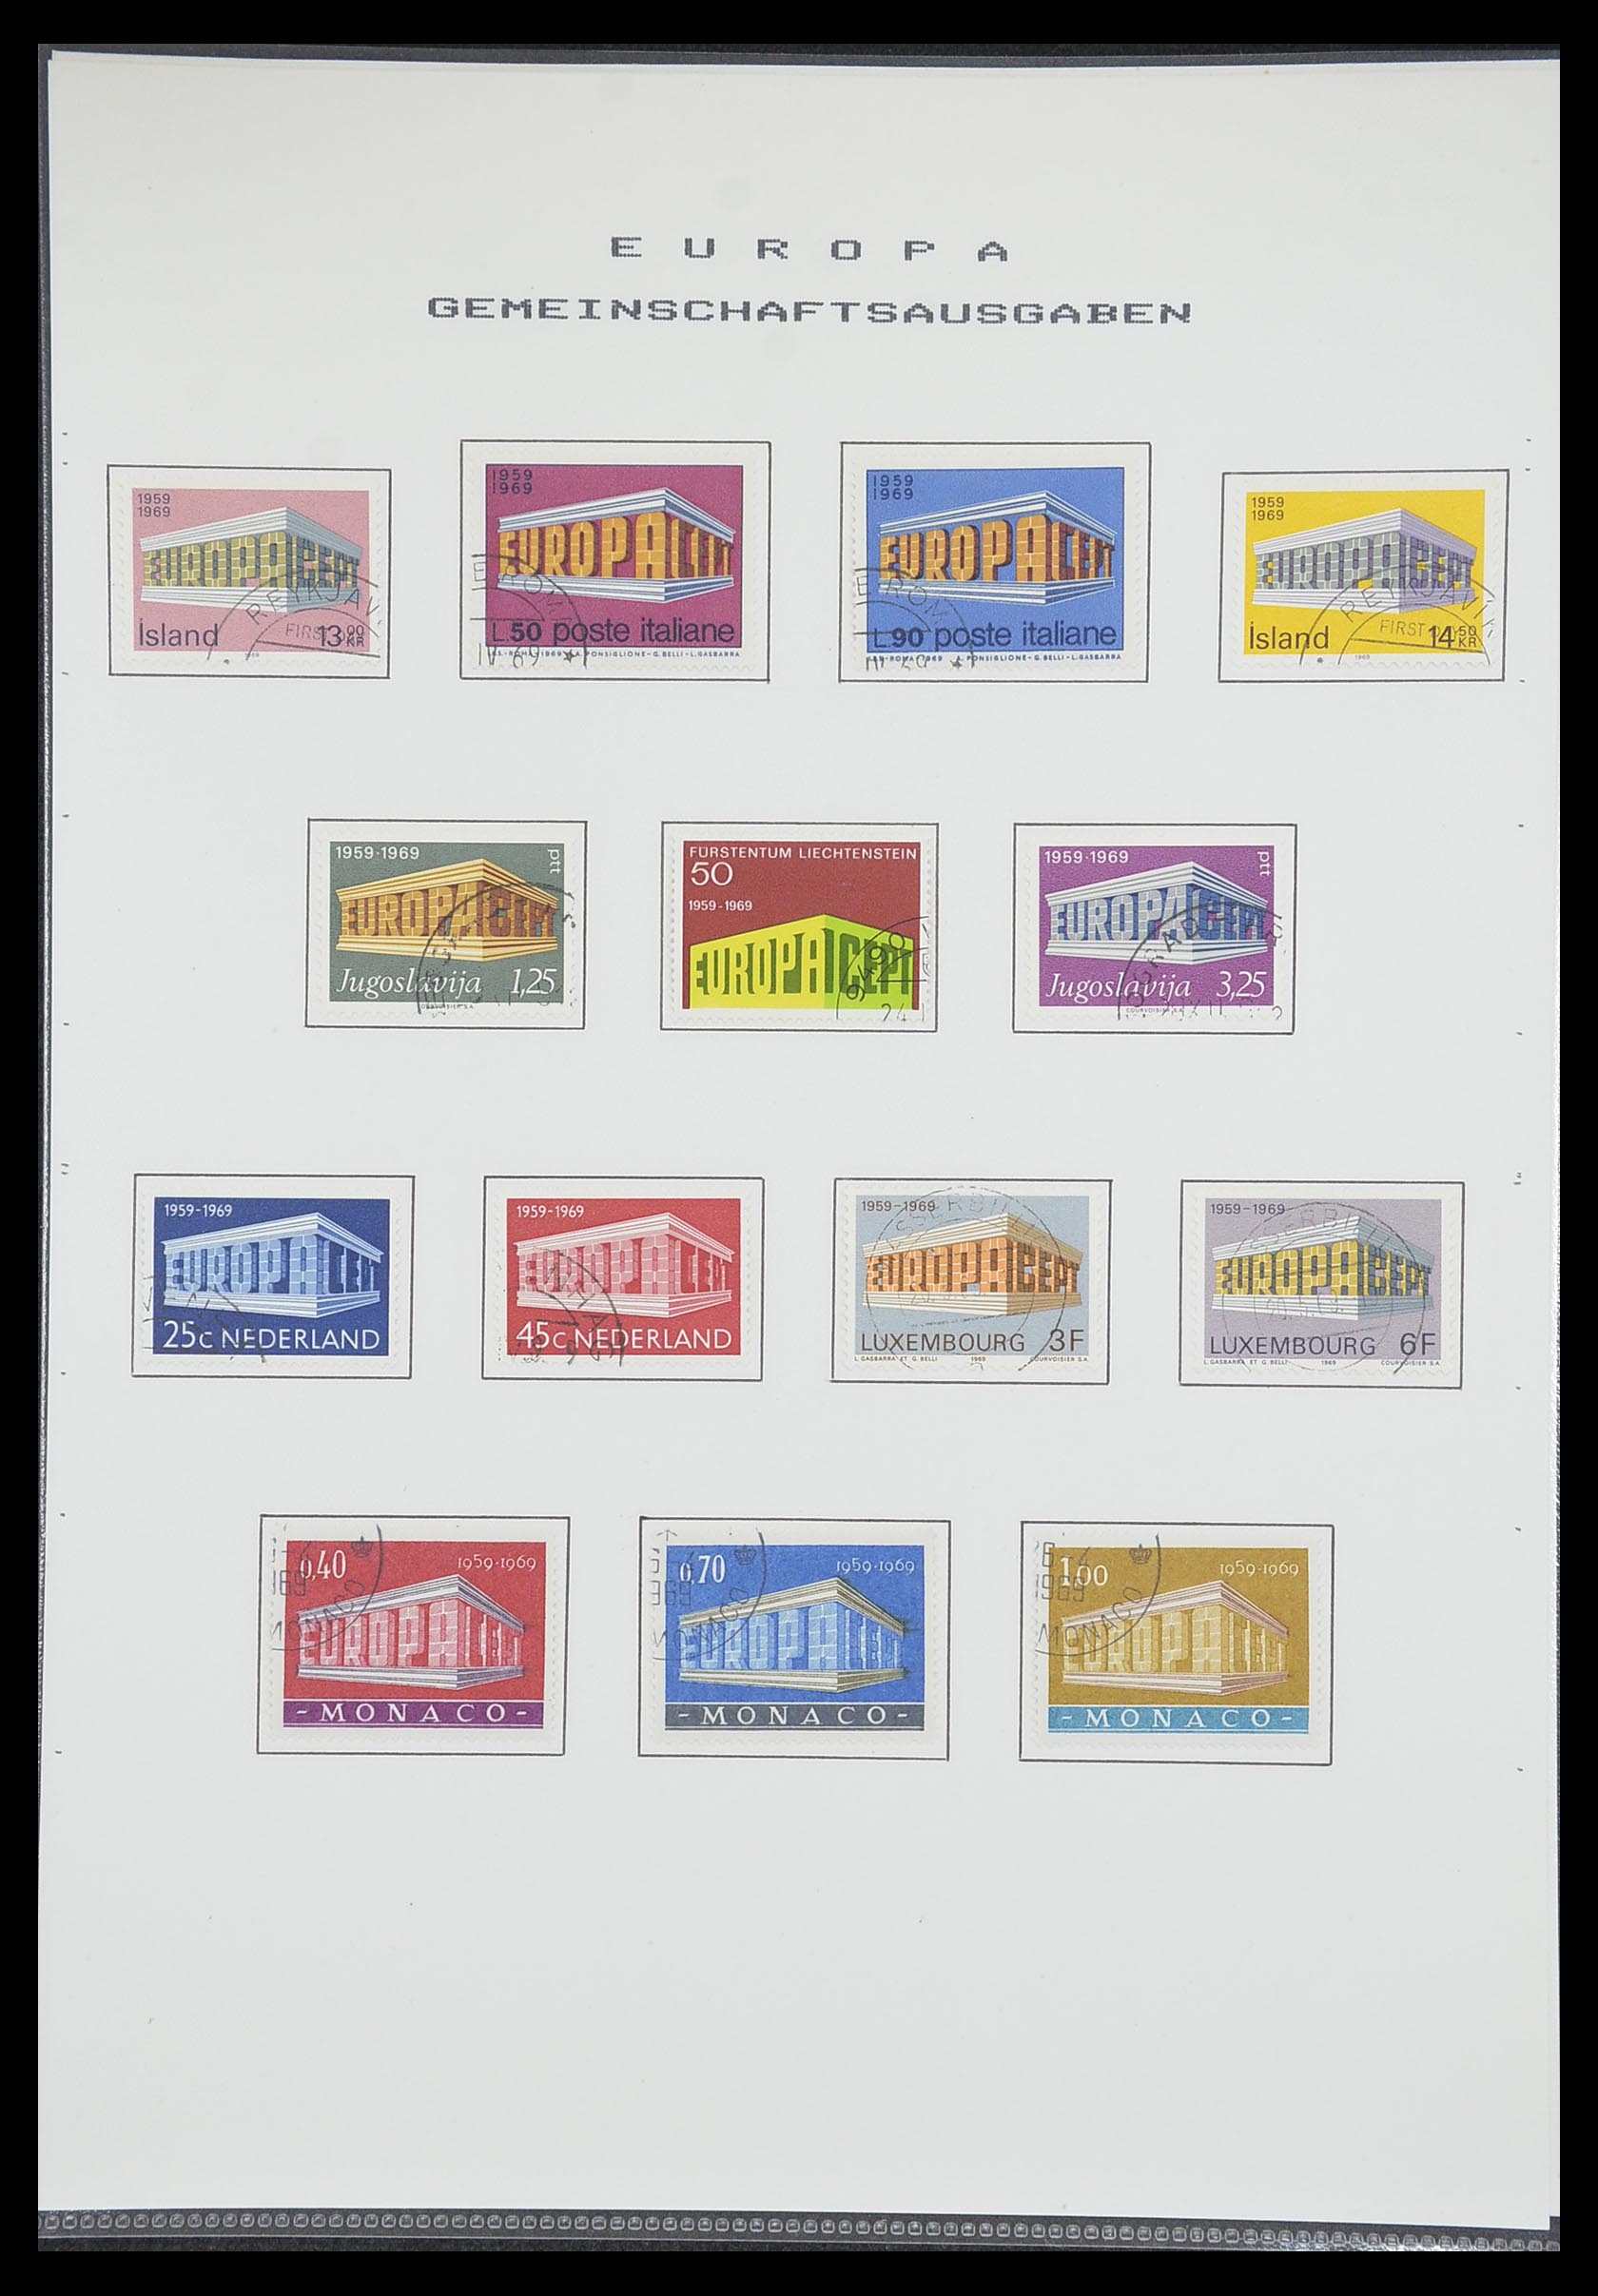 33728 052 - Stamp collection 33728 Europa CEPT 1950-1985.